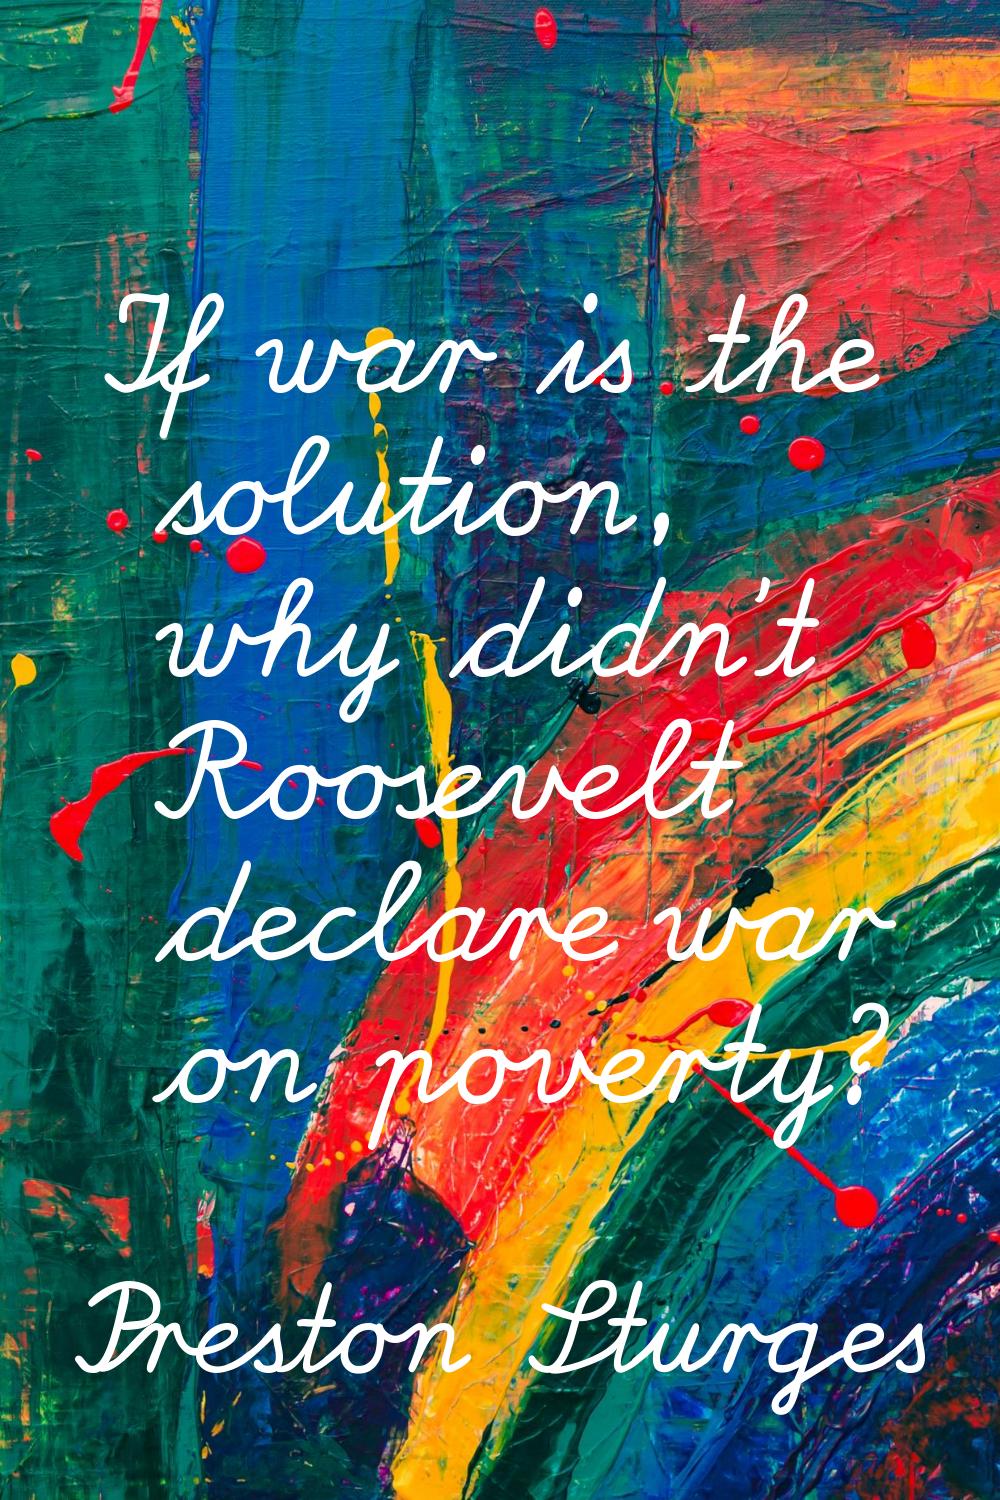 If war is the solution, why didn't Roosevelt declare war on poverty?